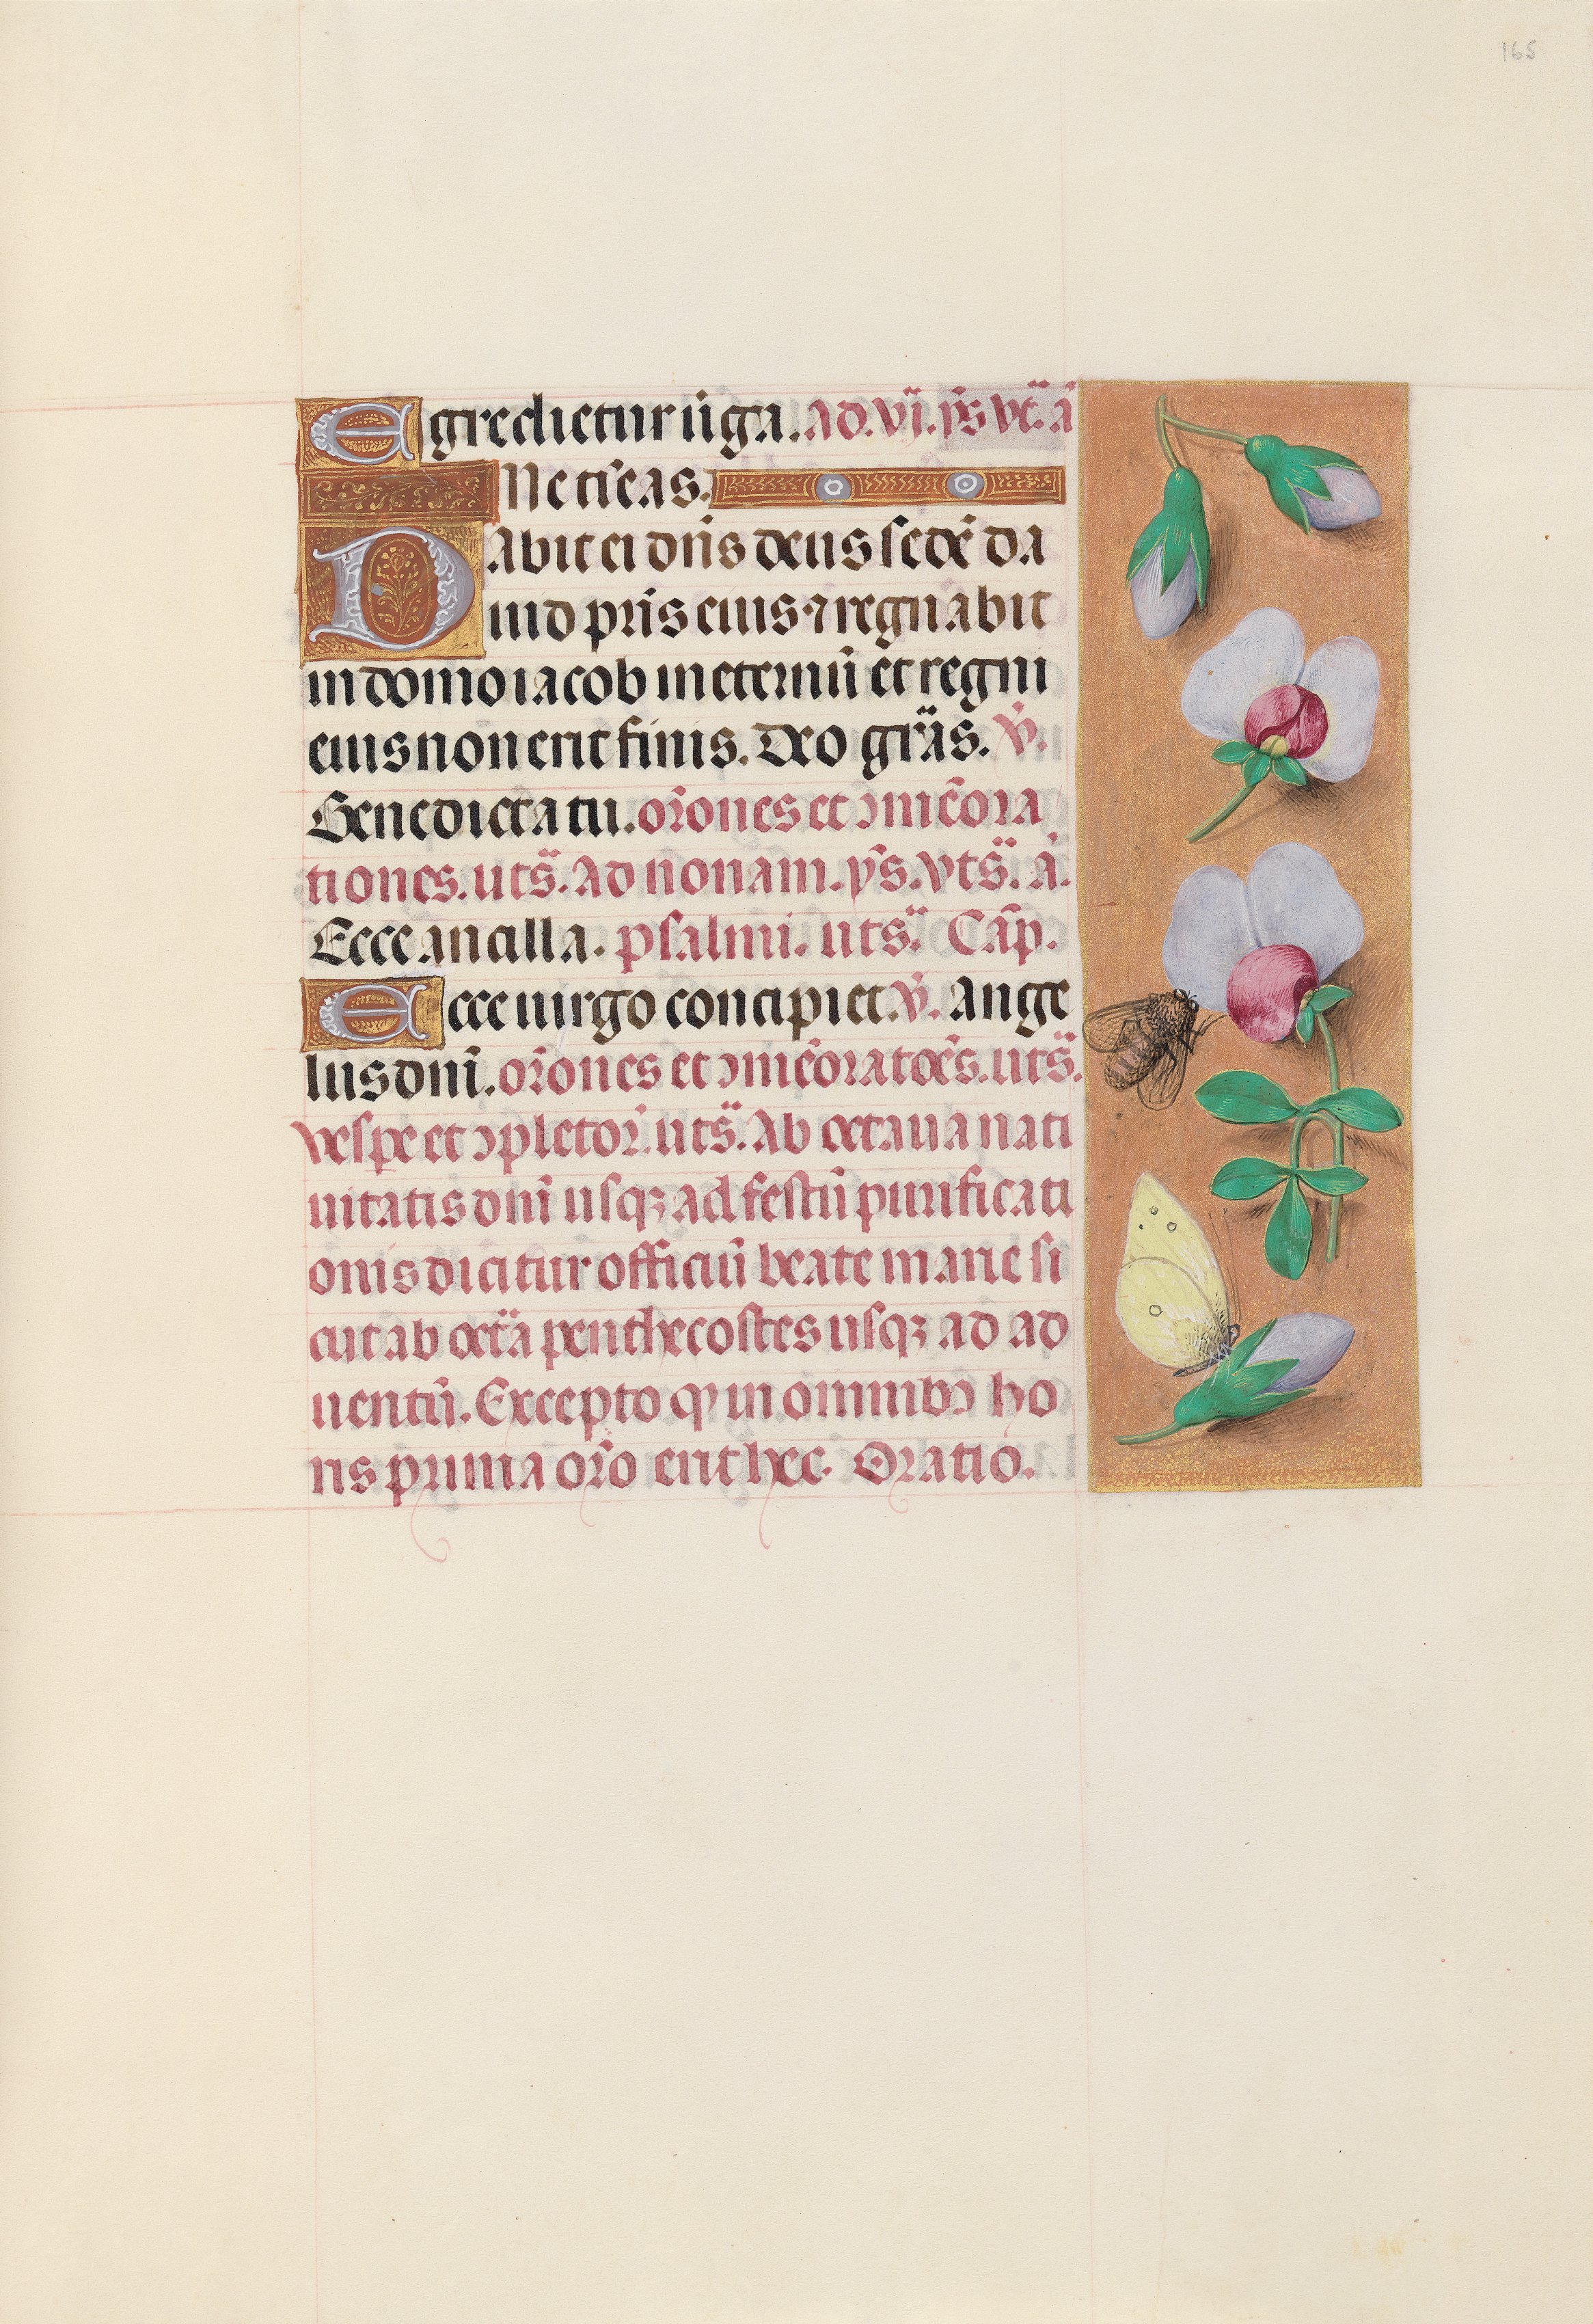 Hours of Queen Isabella the Catholic, Queen of Spain:  Fol. 165r